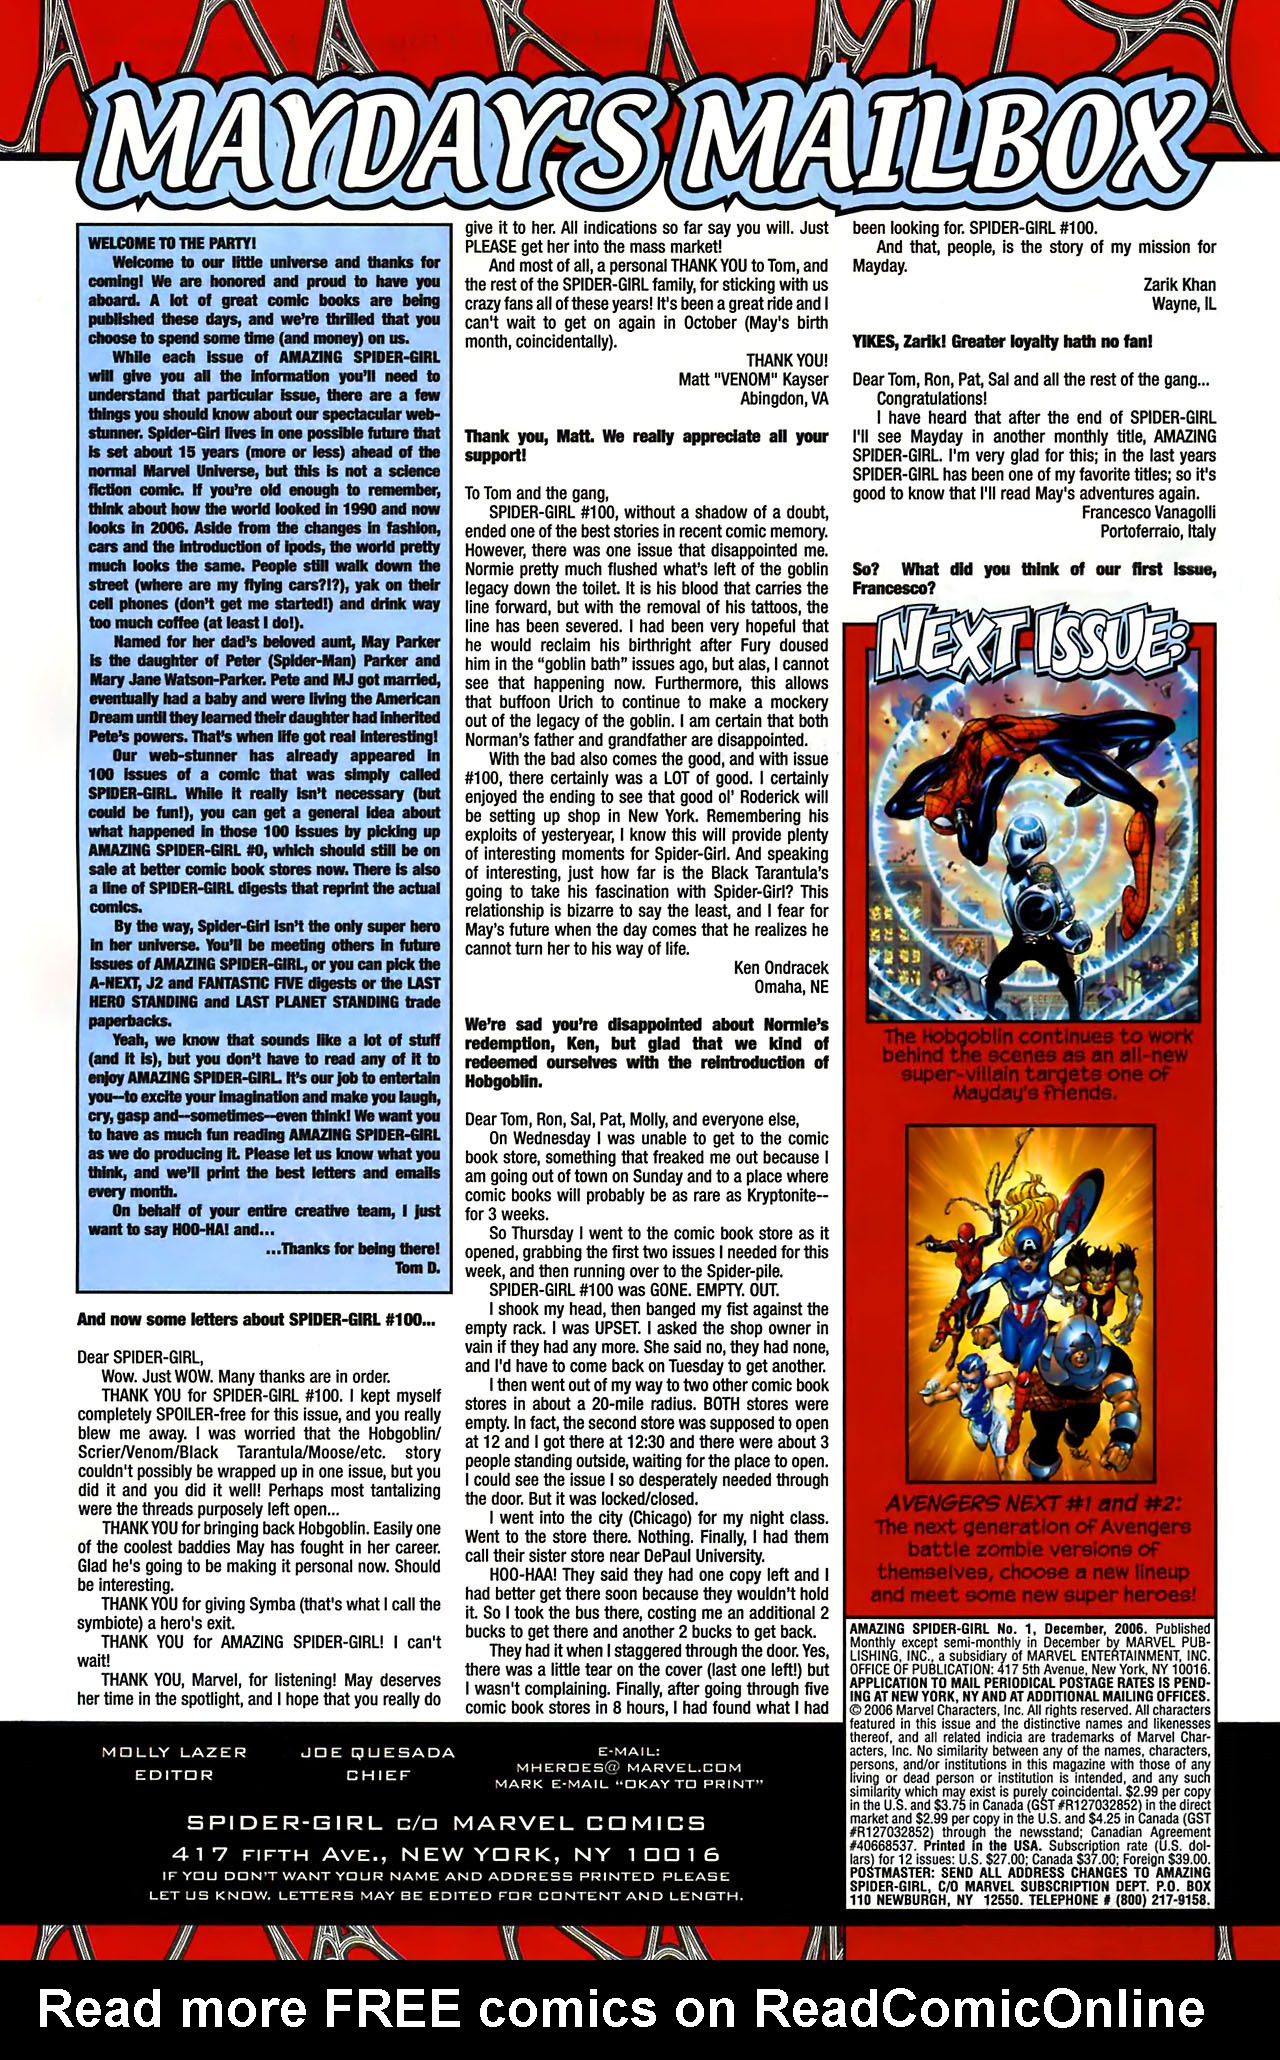 Read online Amazing Spider-Girl comic -  Issue #1 - 26